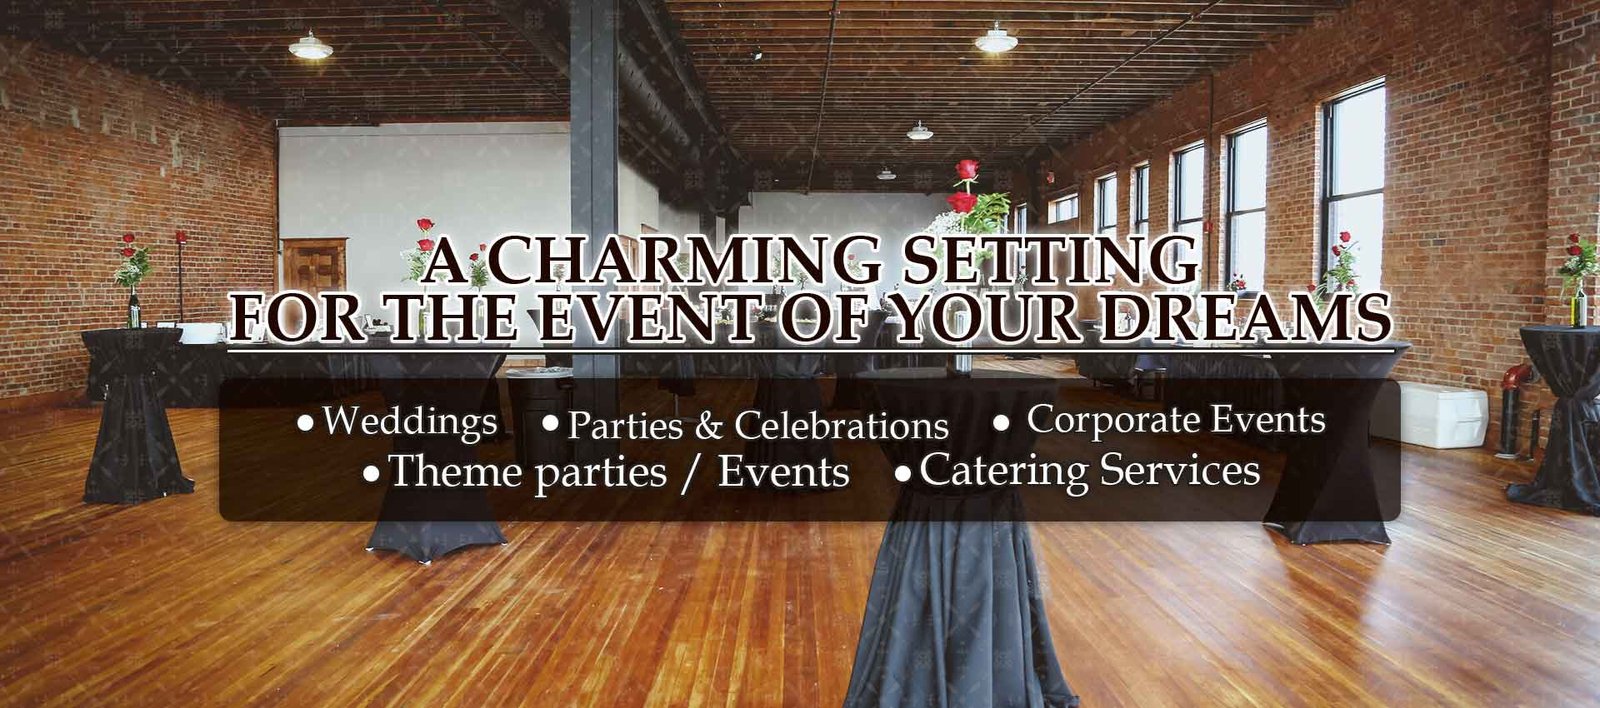 Event Venues with Catering in Beatrice NE